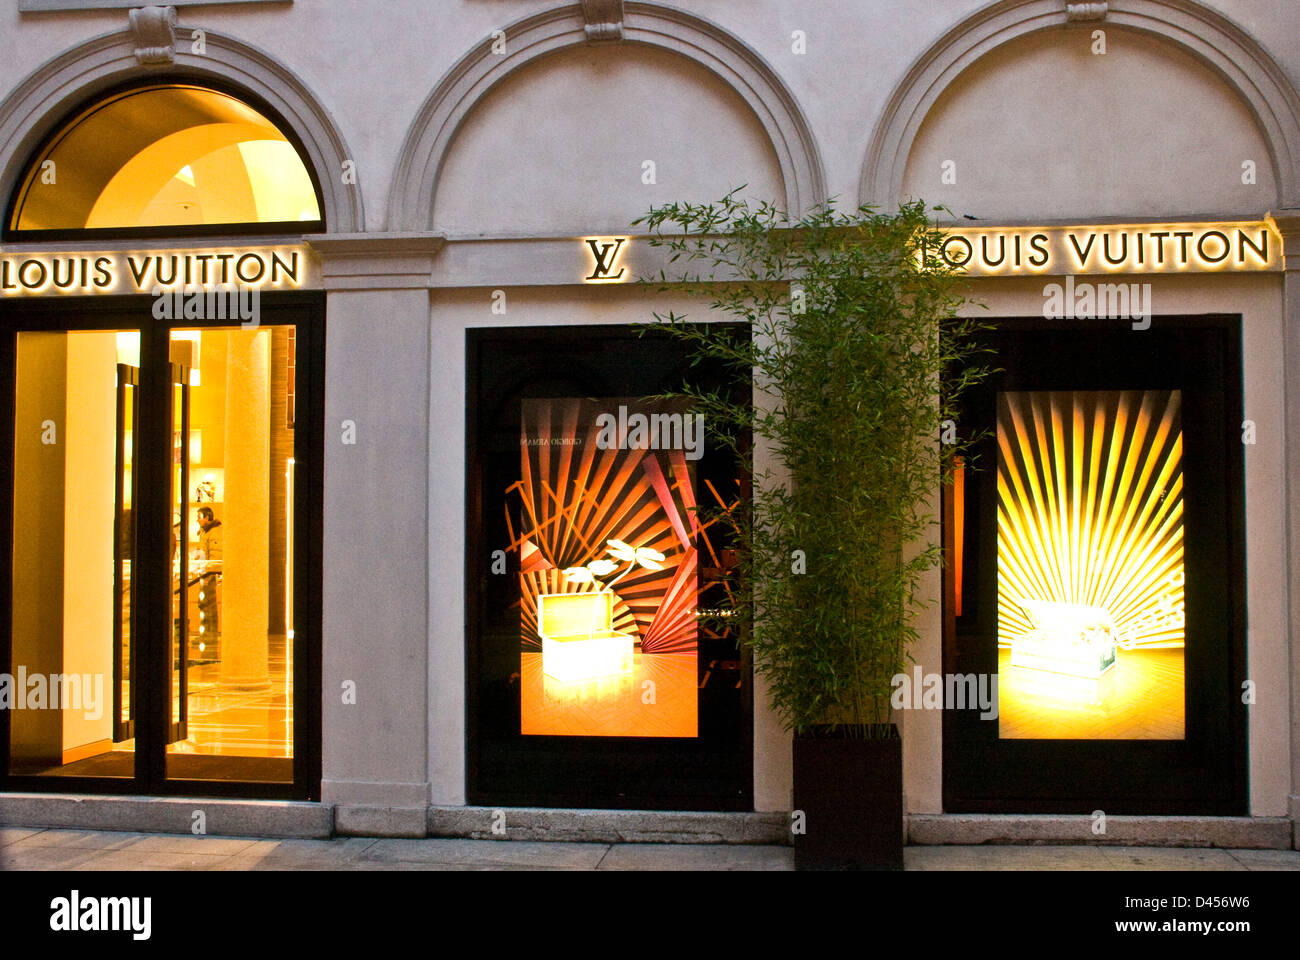 Show us pics of LV store fronts  Storefront design, Facade design, Store  fronts